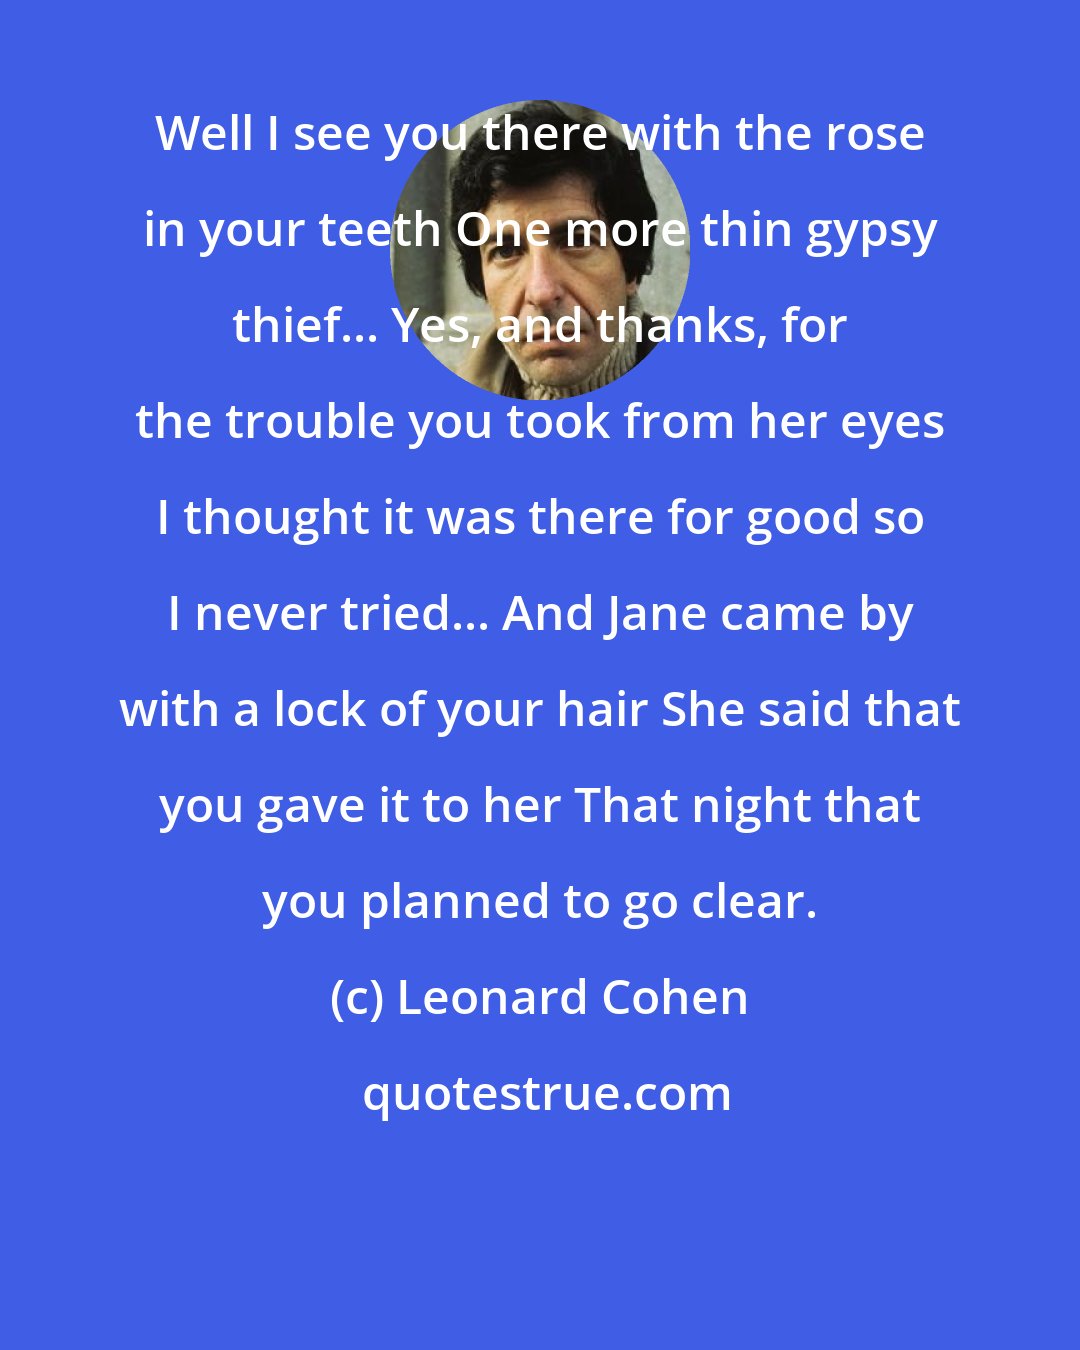 Leonard Cohen: Well I see you there with the rose in your teeth One more thin gypsy thief... Yes, and thanks, for the trouble you took from her eyes I thought it was there for good so I never tried... And Jane came by with a lock of your hair She said that you gave it to her That night that you planned to go clear.